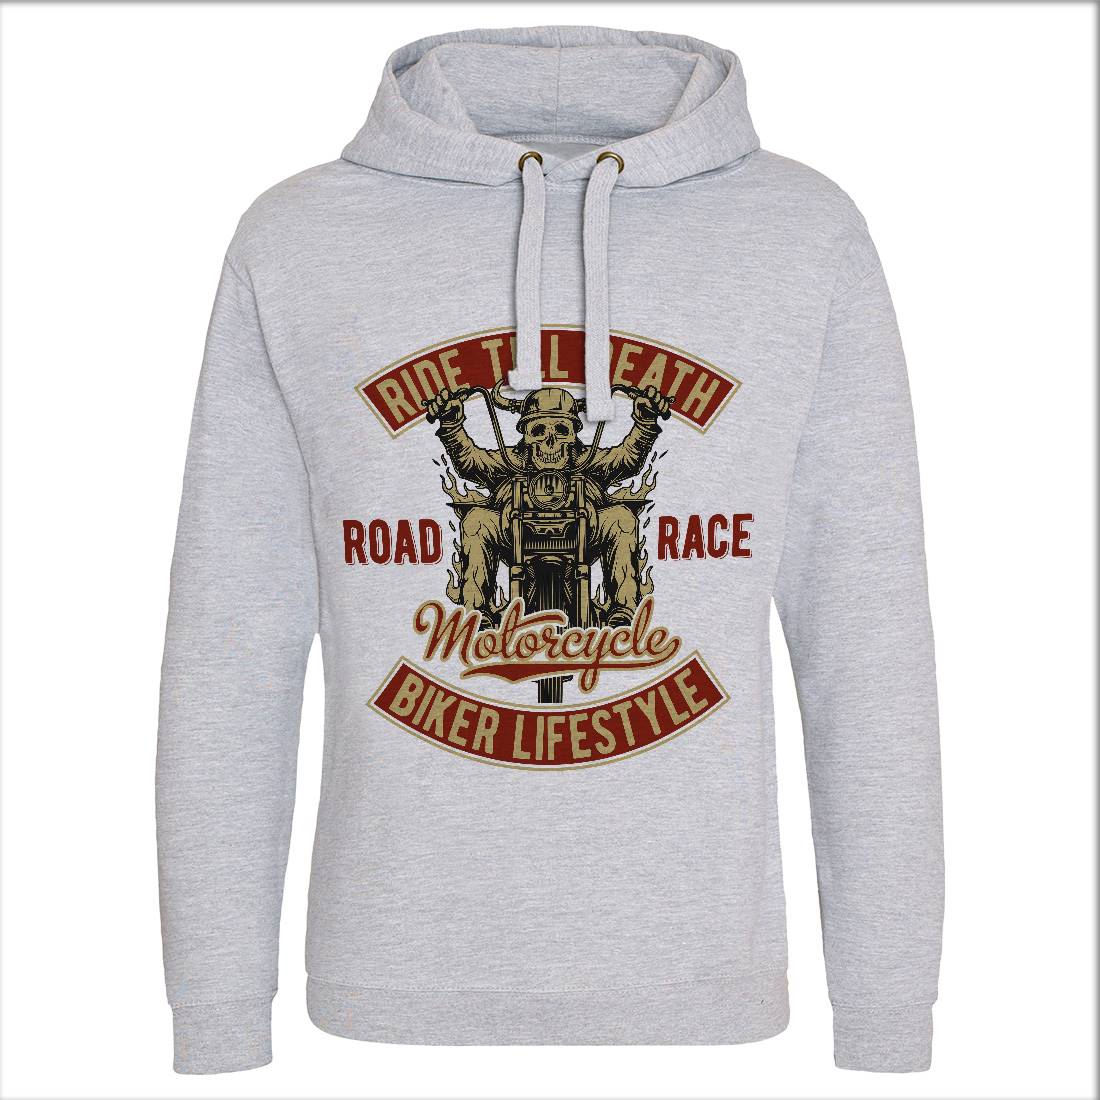 Ride Till Death Mens Hoodie Without Pocket Motorcycles B857